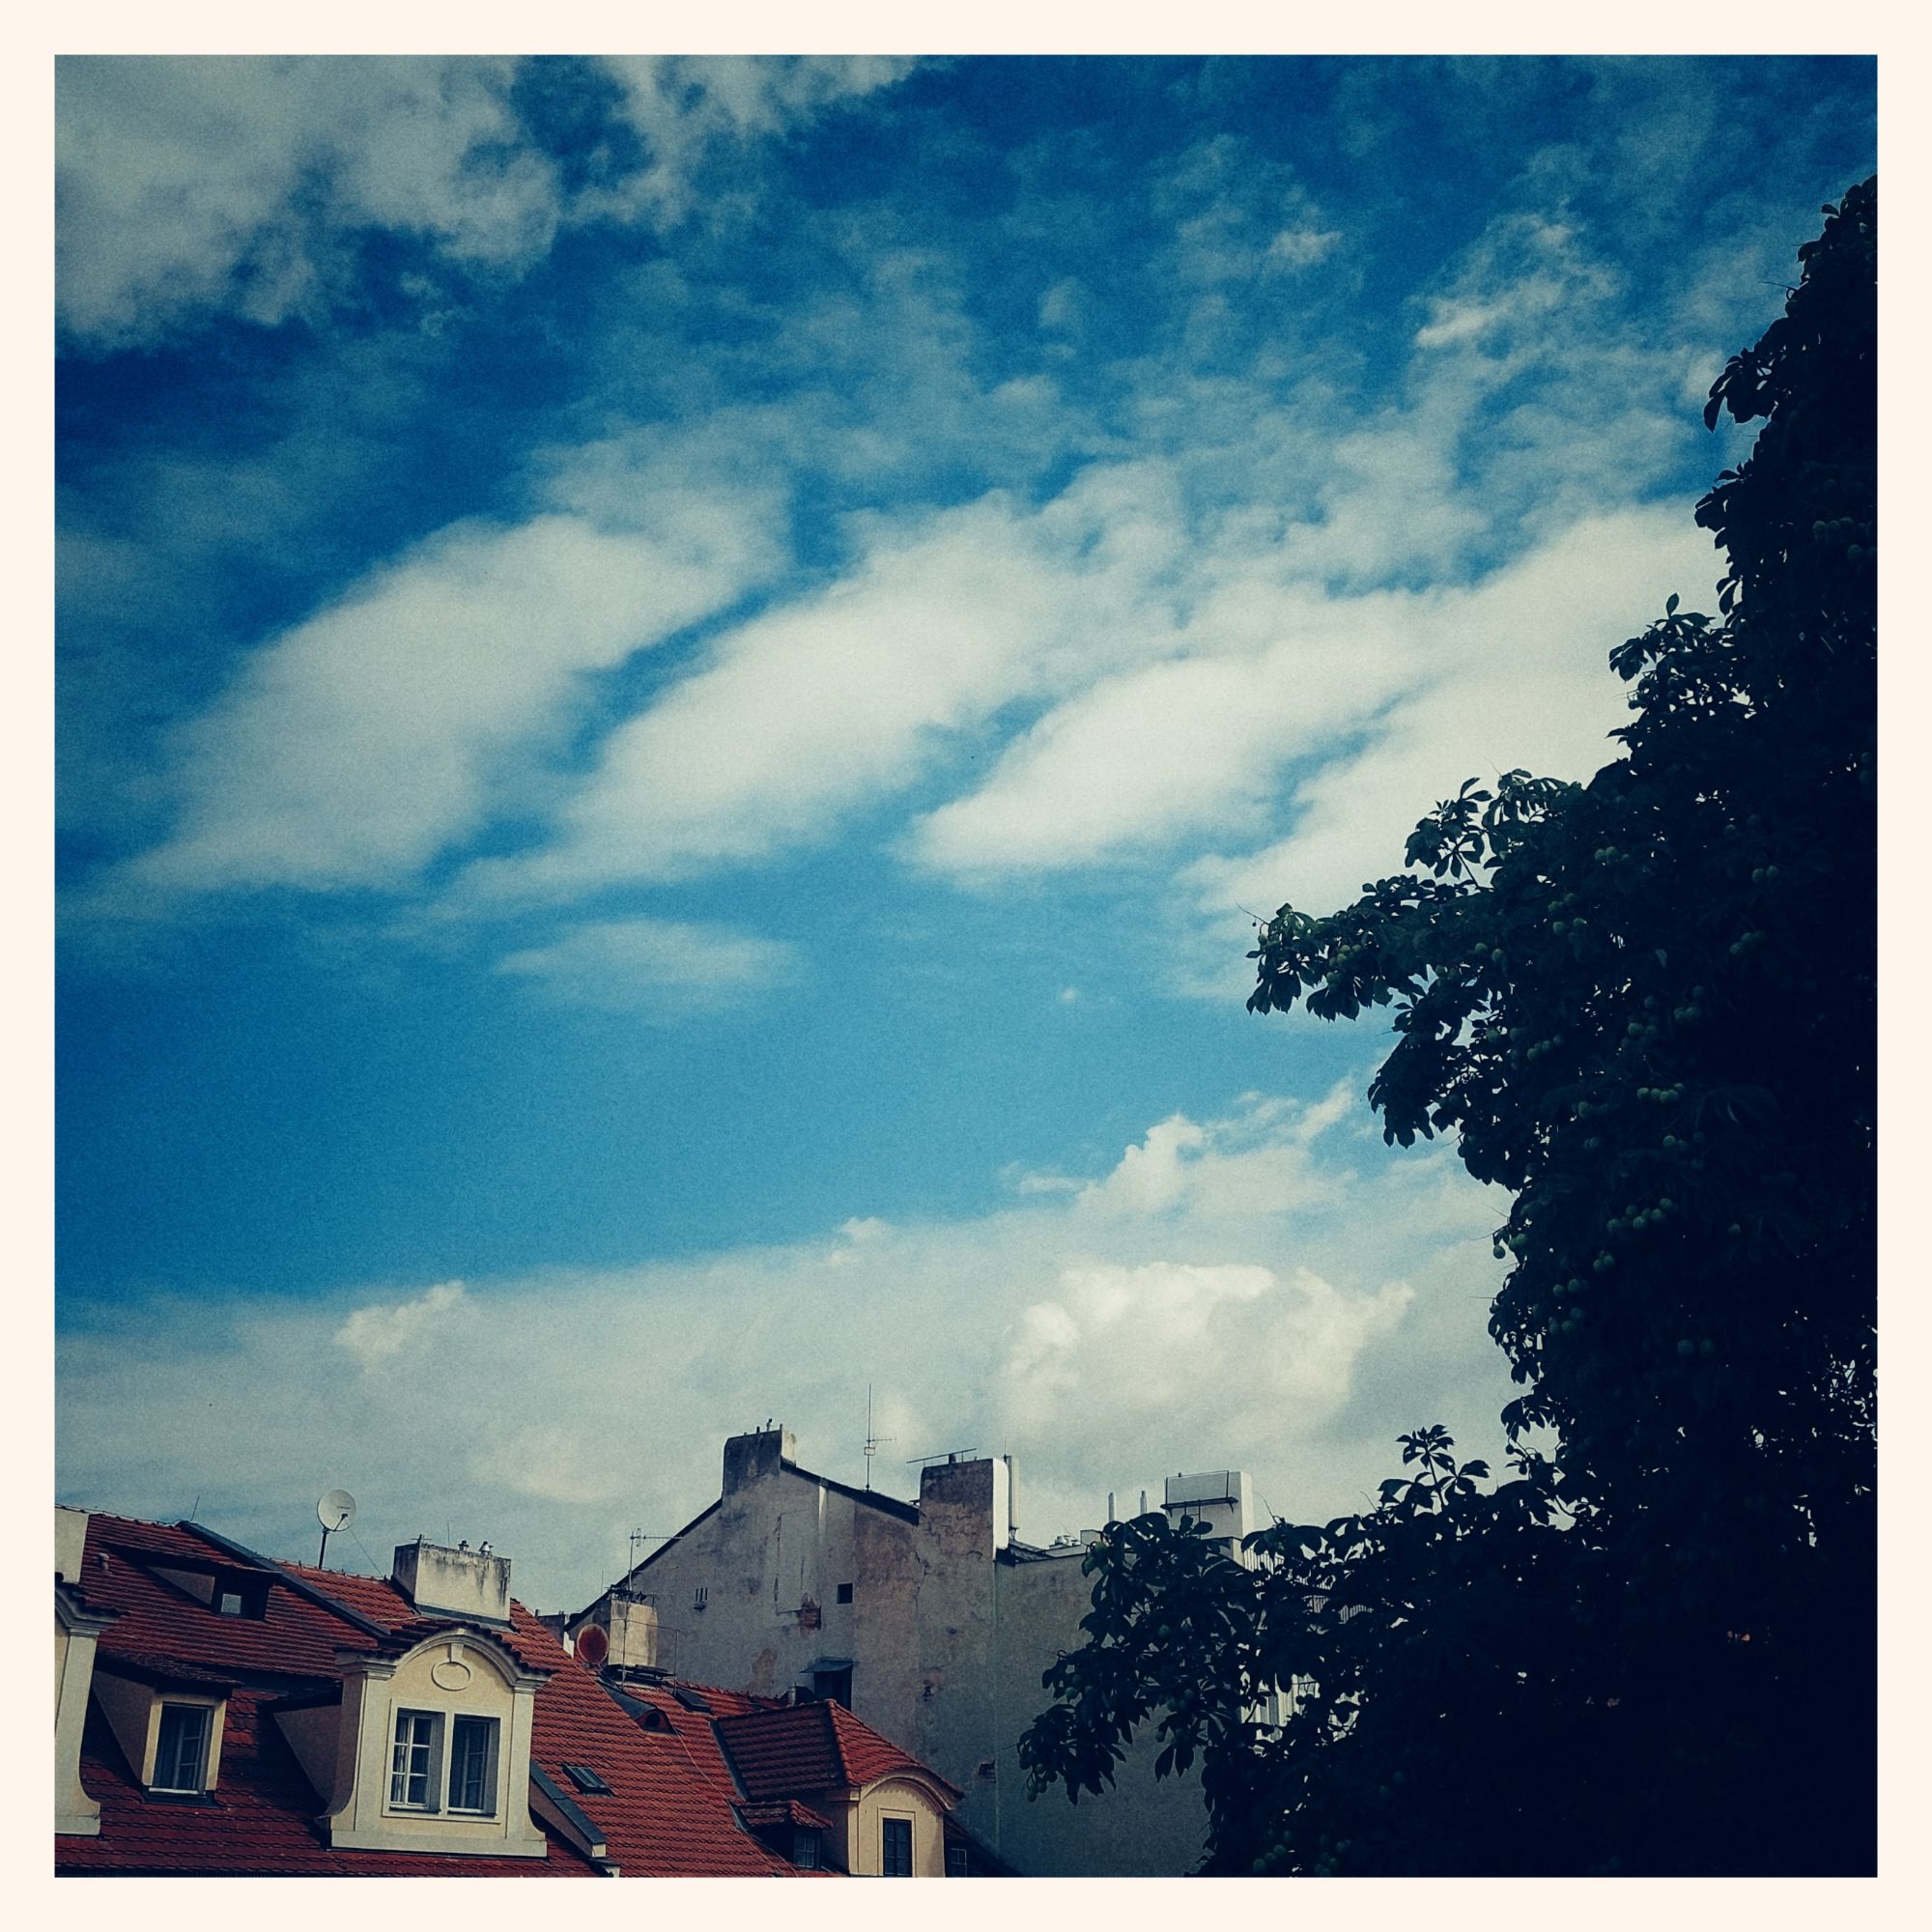 A collection of white clouds above old city roofs. Blue sky, and a huge tree.